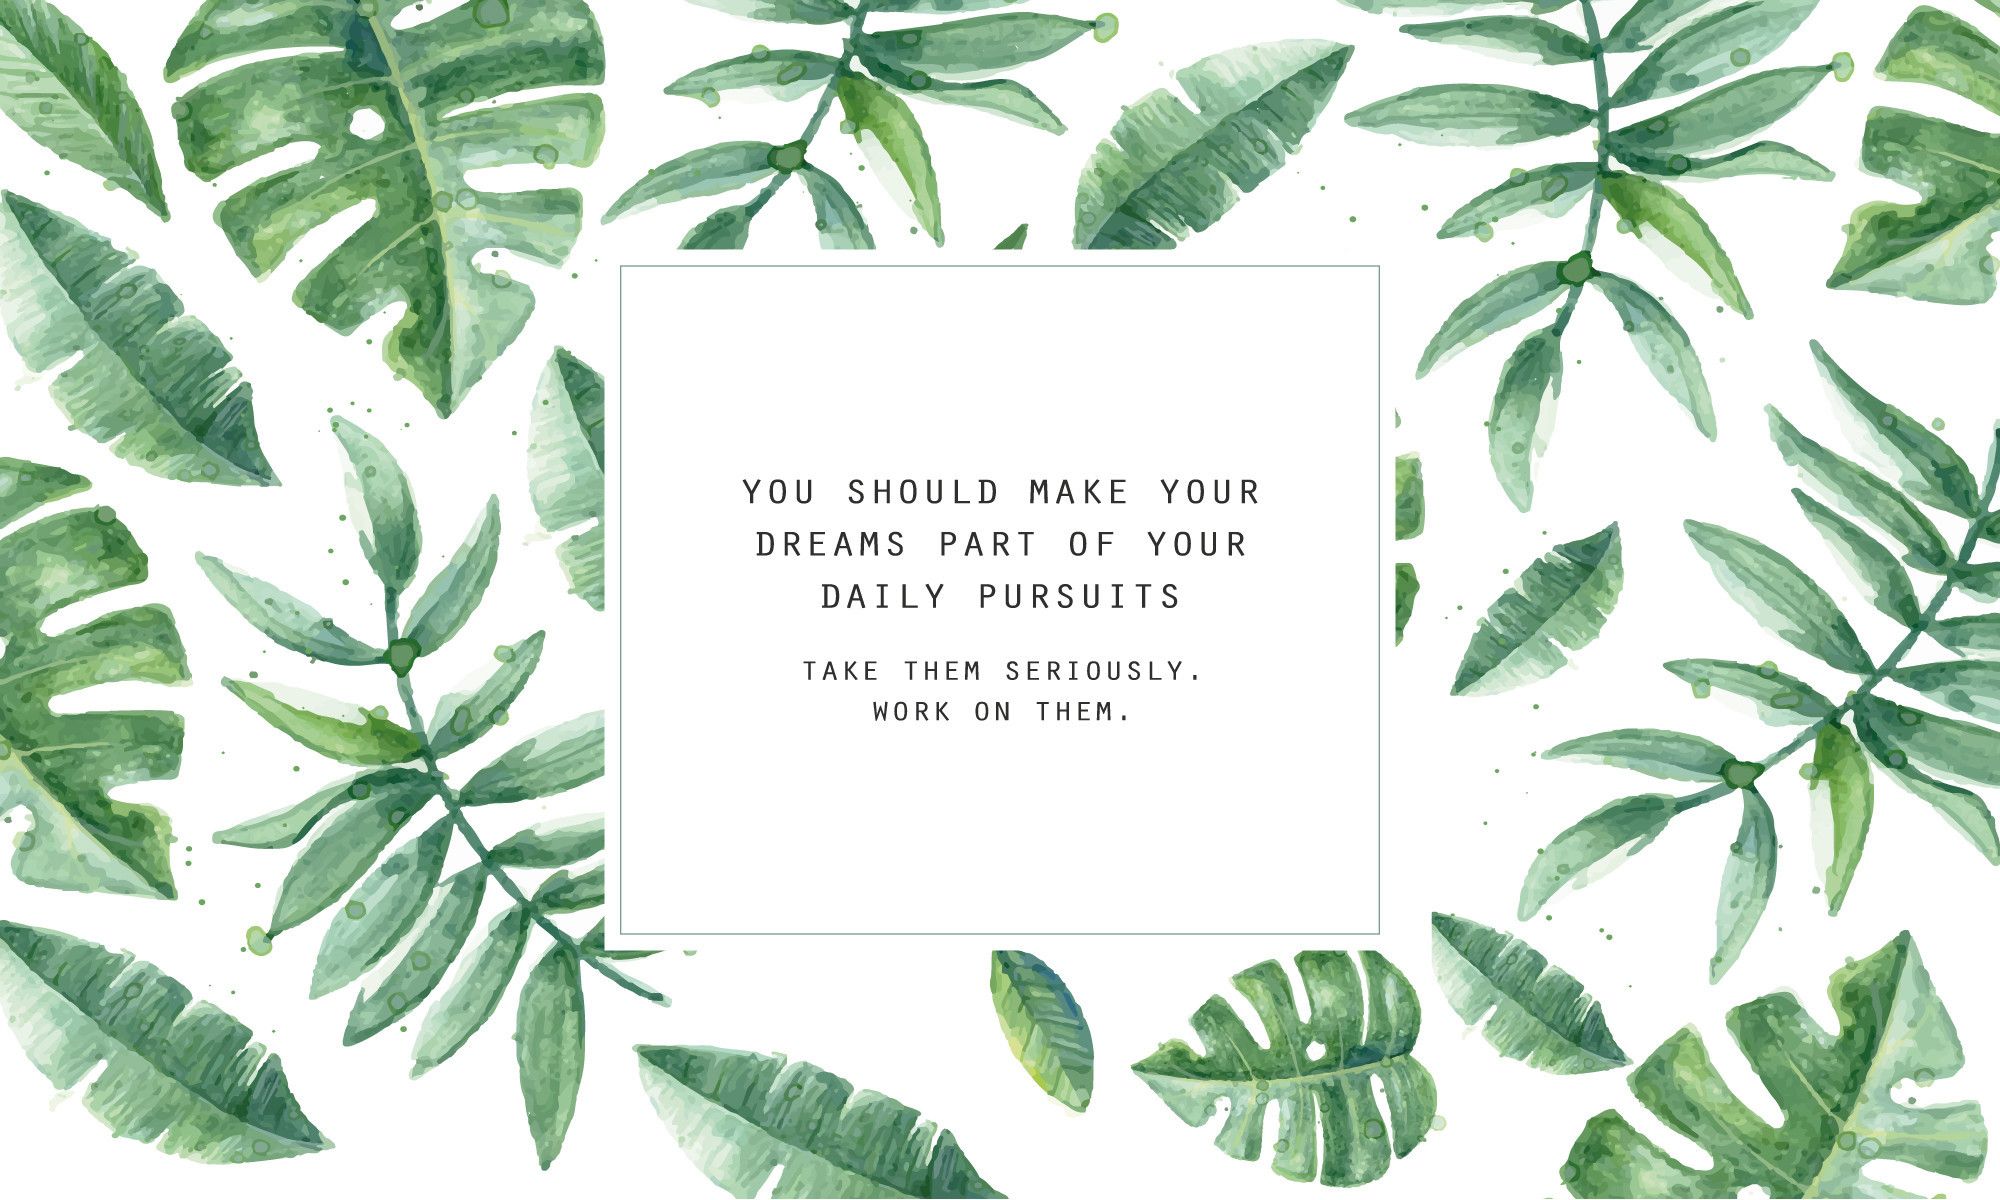 You should make your dreams part of your daily pursuits. Take them seriously. Work on them. - Leaves, plants, quotes, tropical